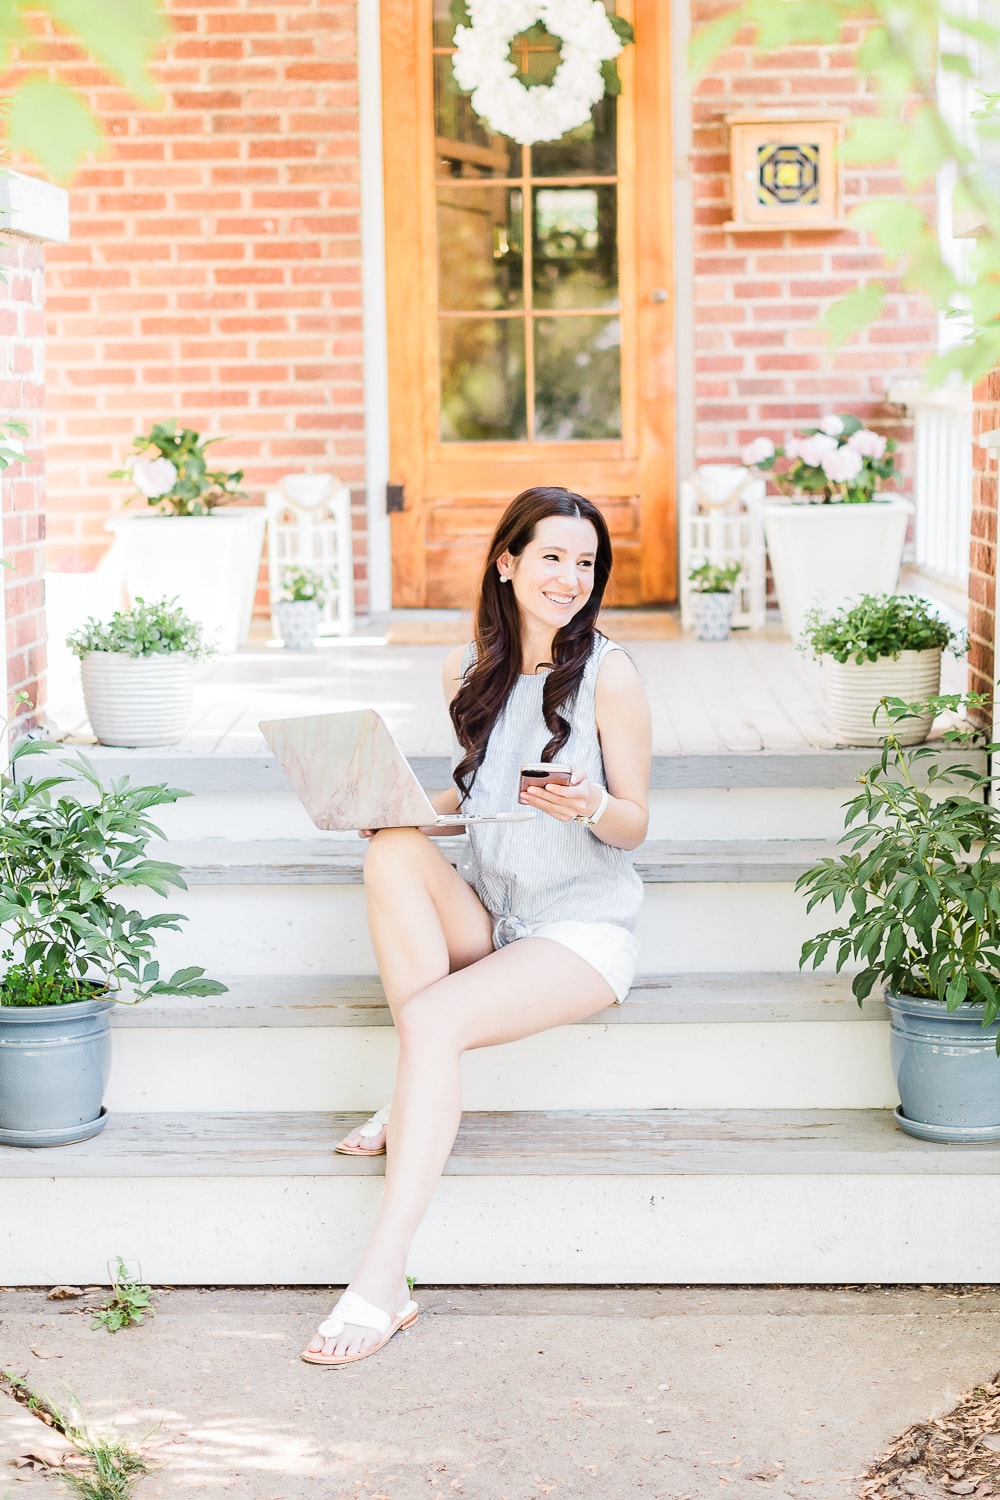 Blogger Stephanie Ziajka shares 3 small business tips for surviving COVID, all of which she got from GoDaddy's #OpenWeStand chat on LinkedIn, on Diary of a Debutante